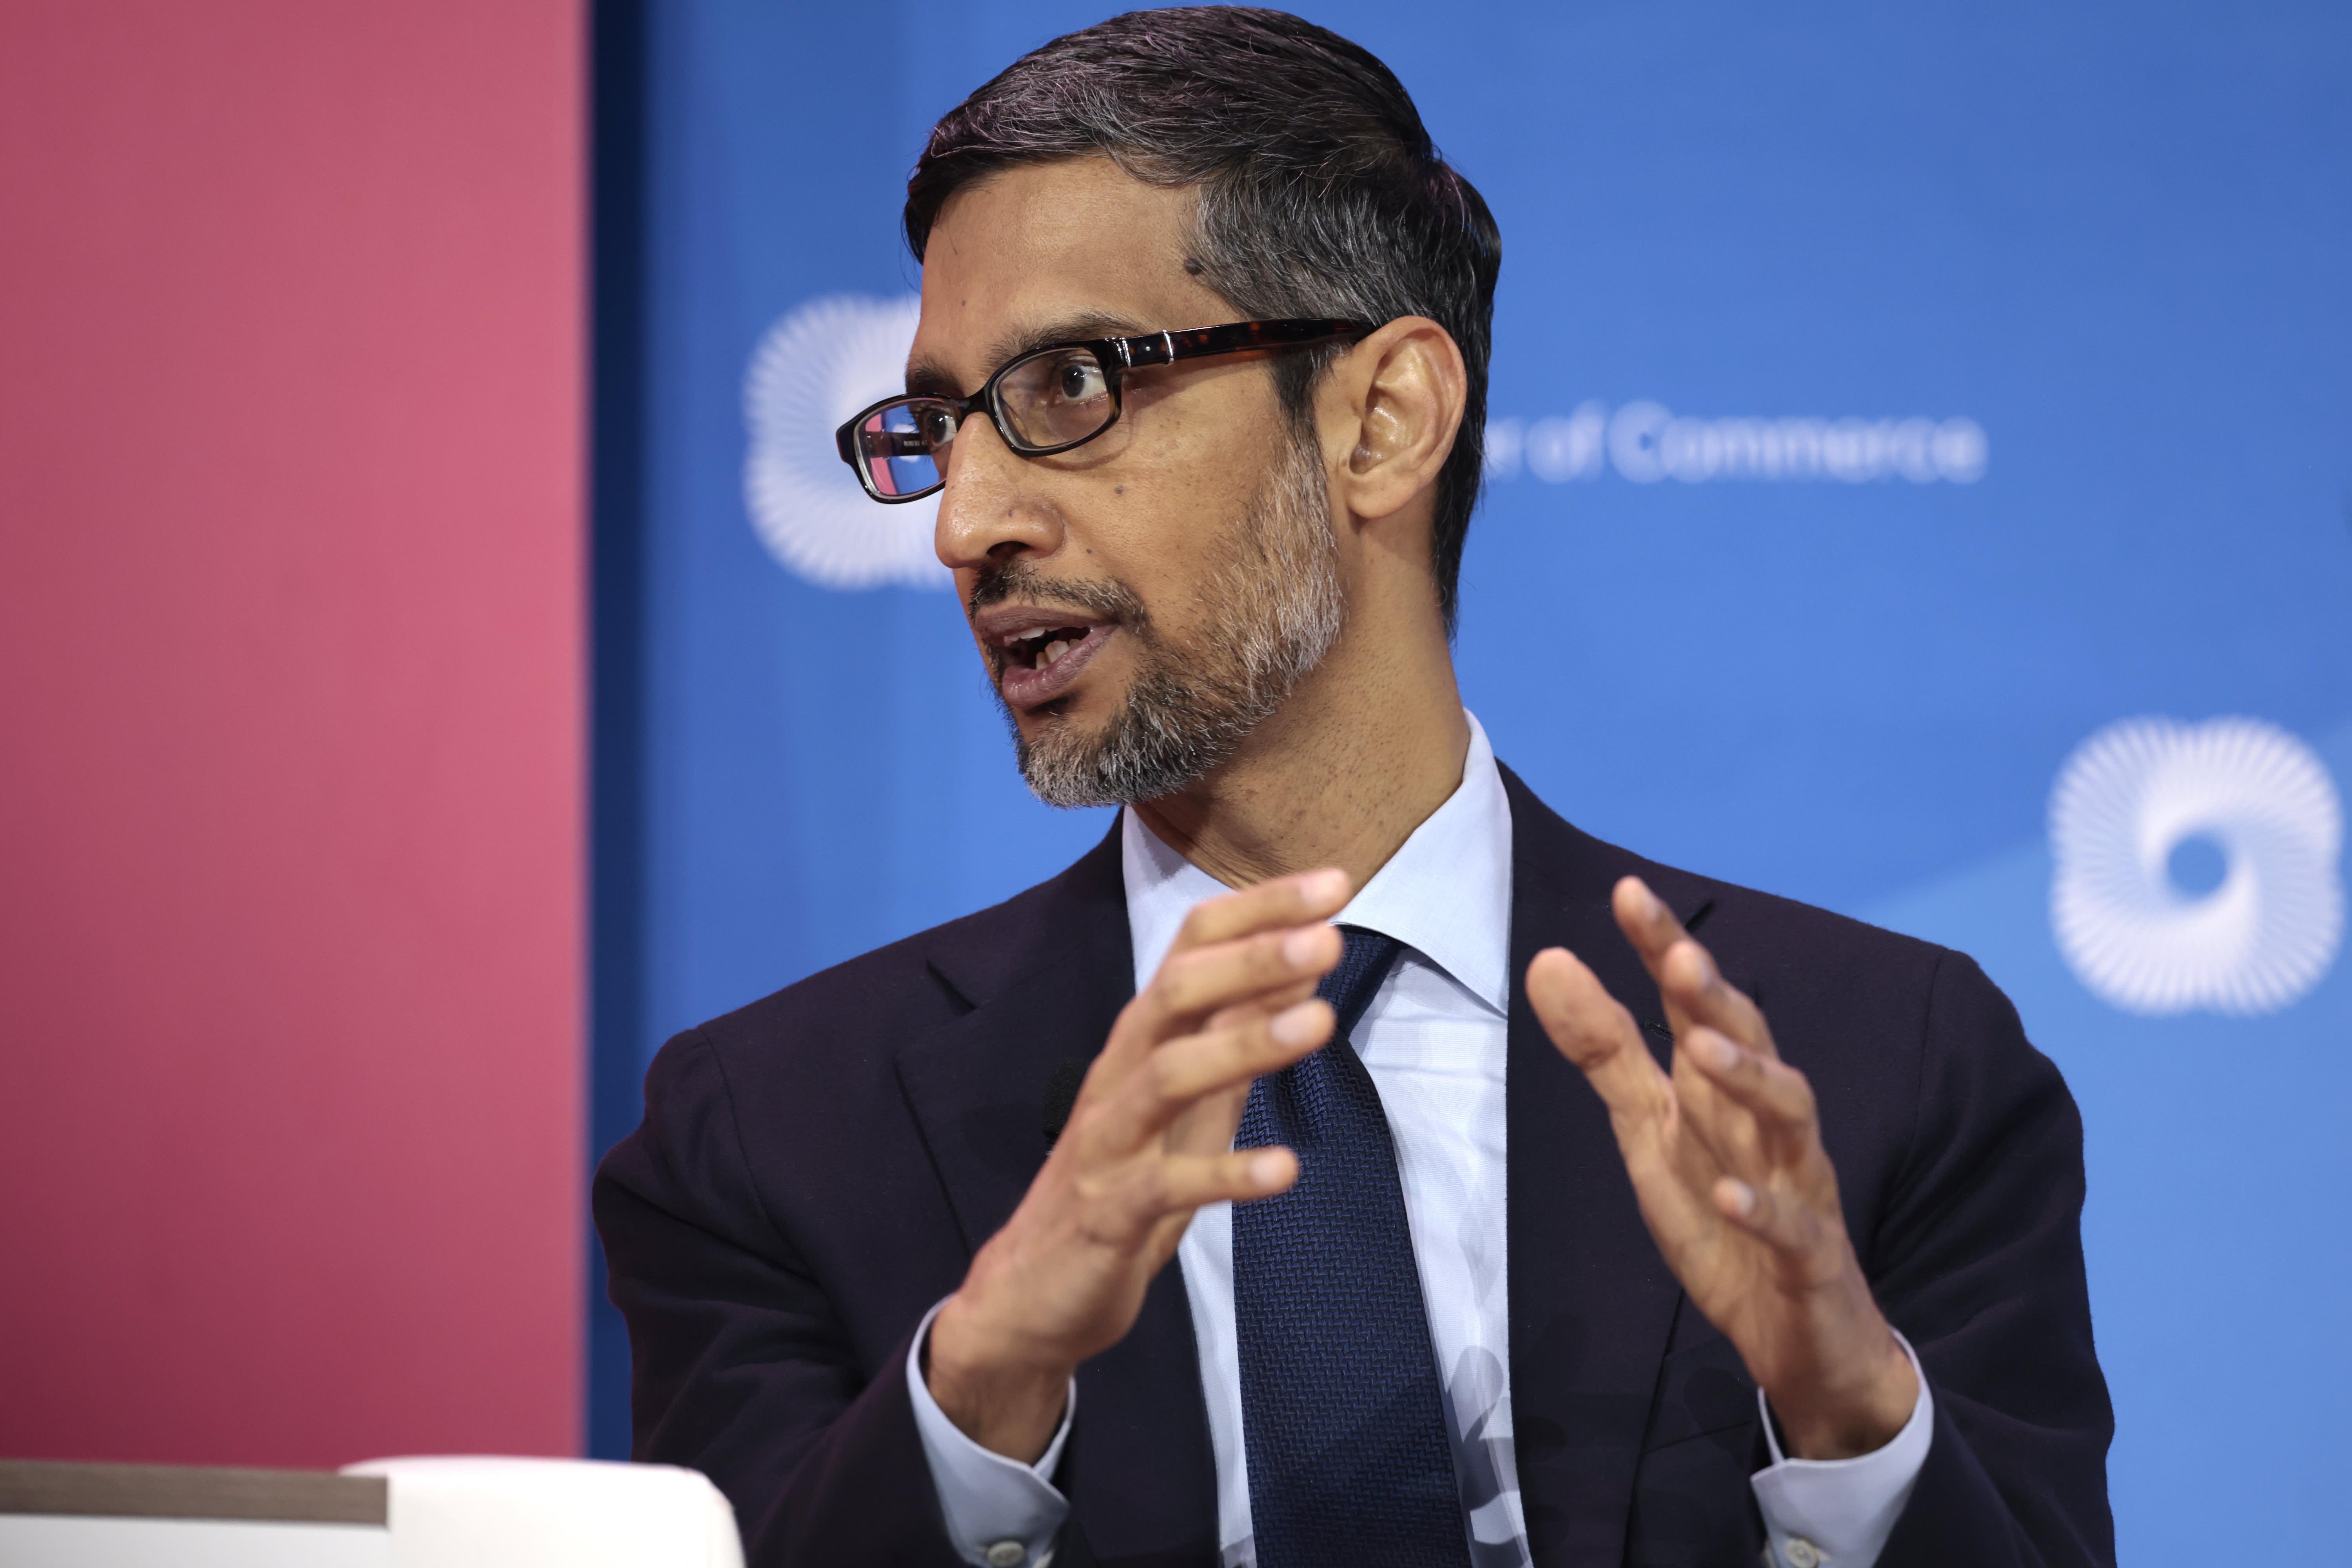 Google CEO Sundar Pichai warns society to prepare for the impact of accelerating artificial intelligence